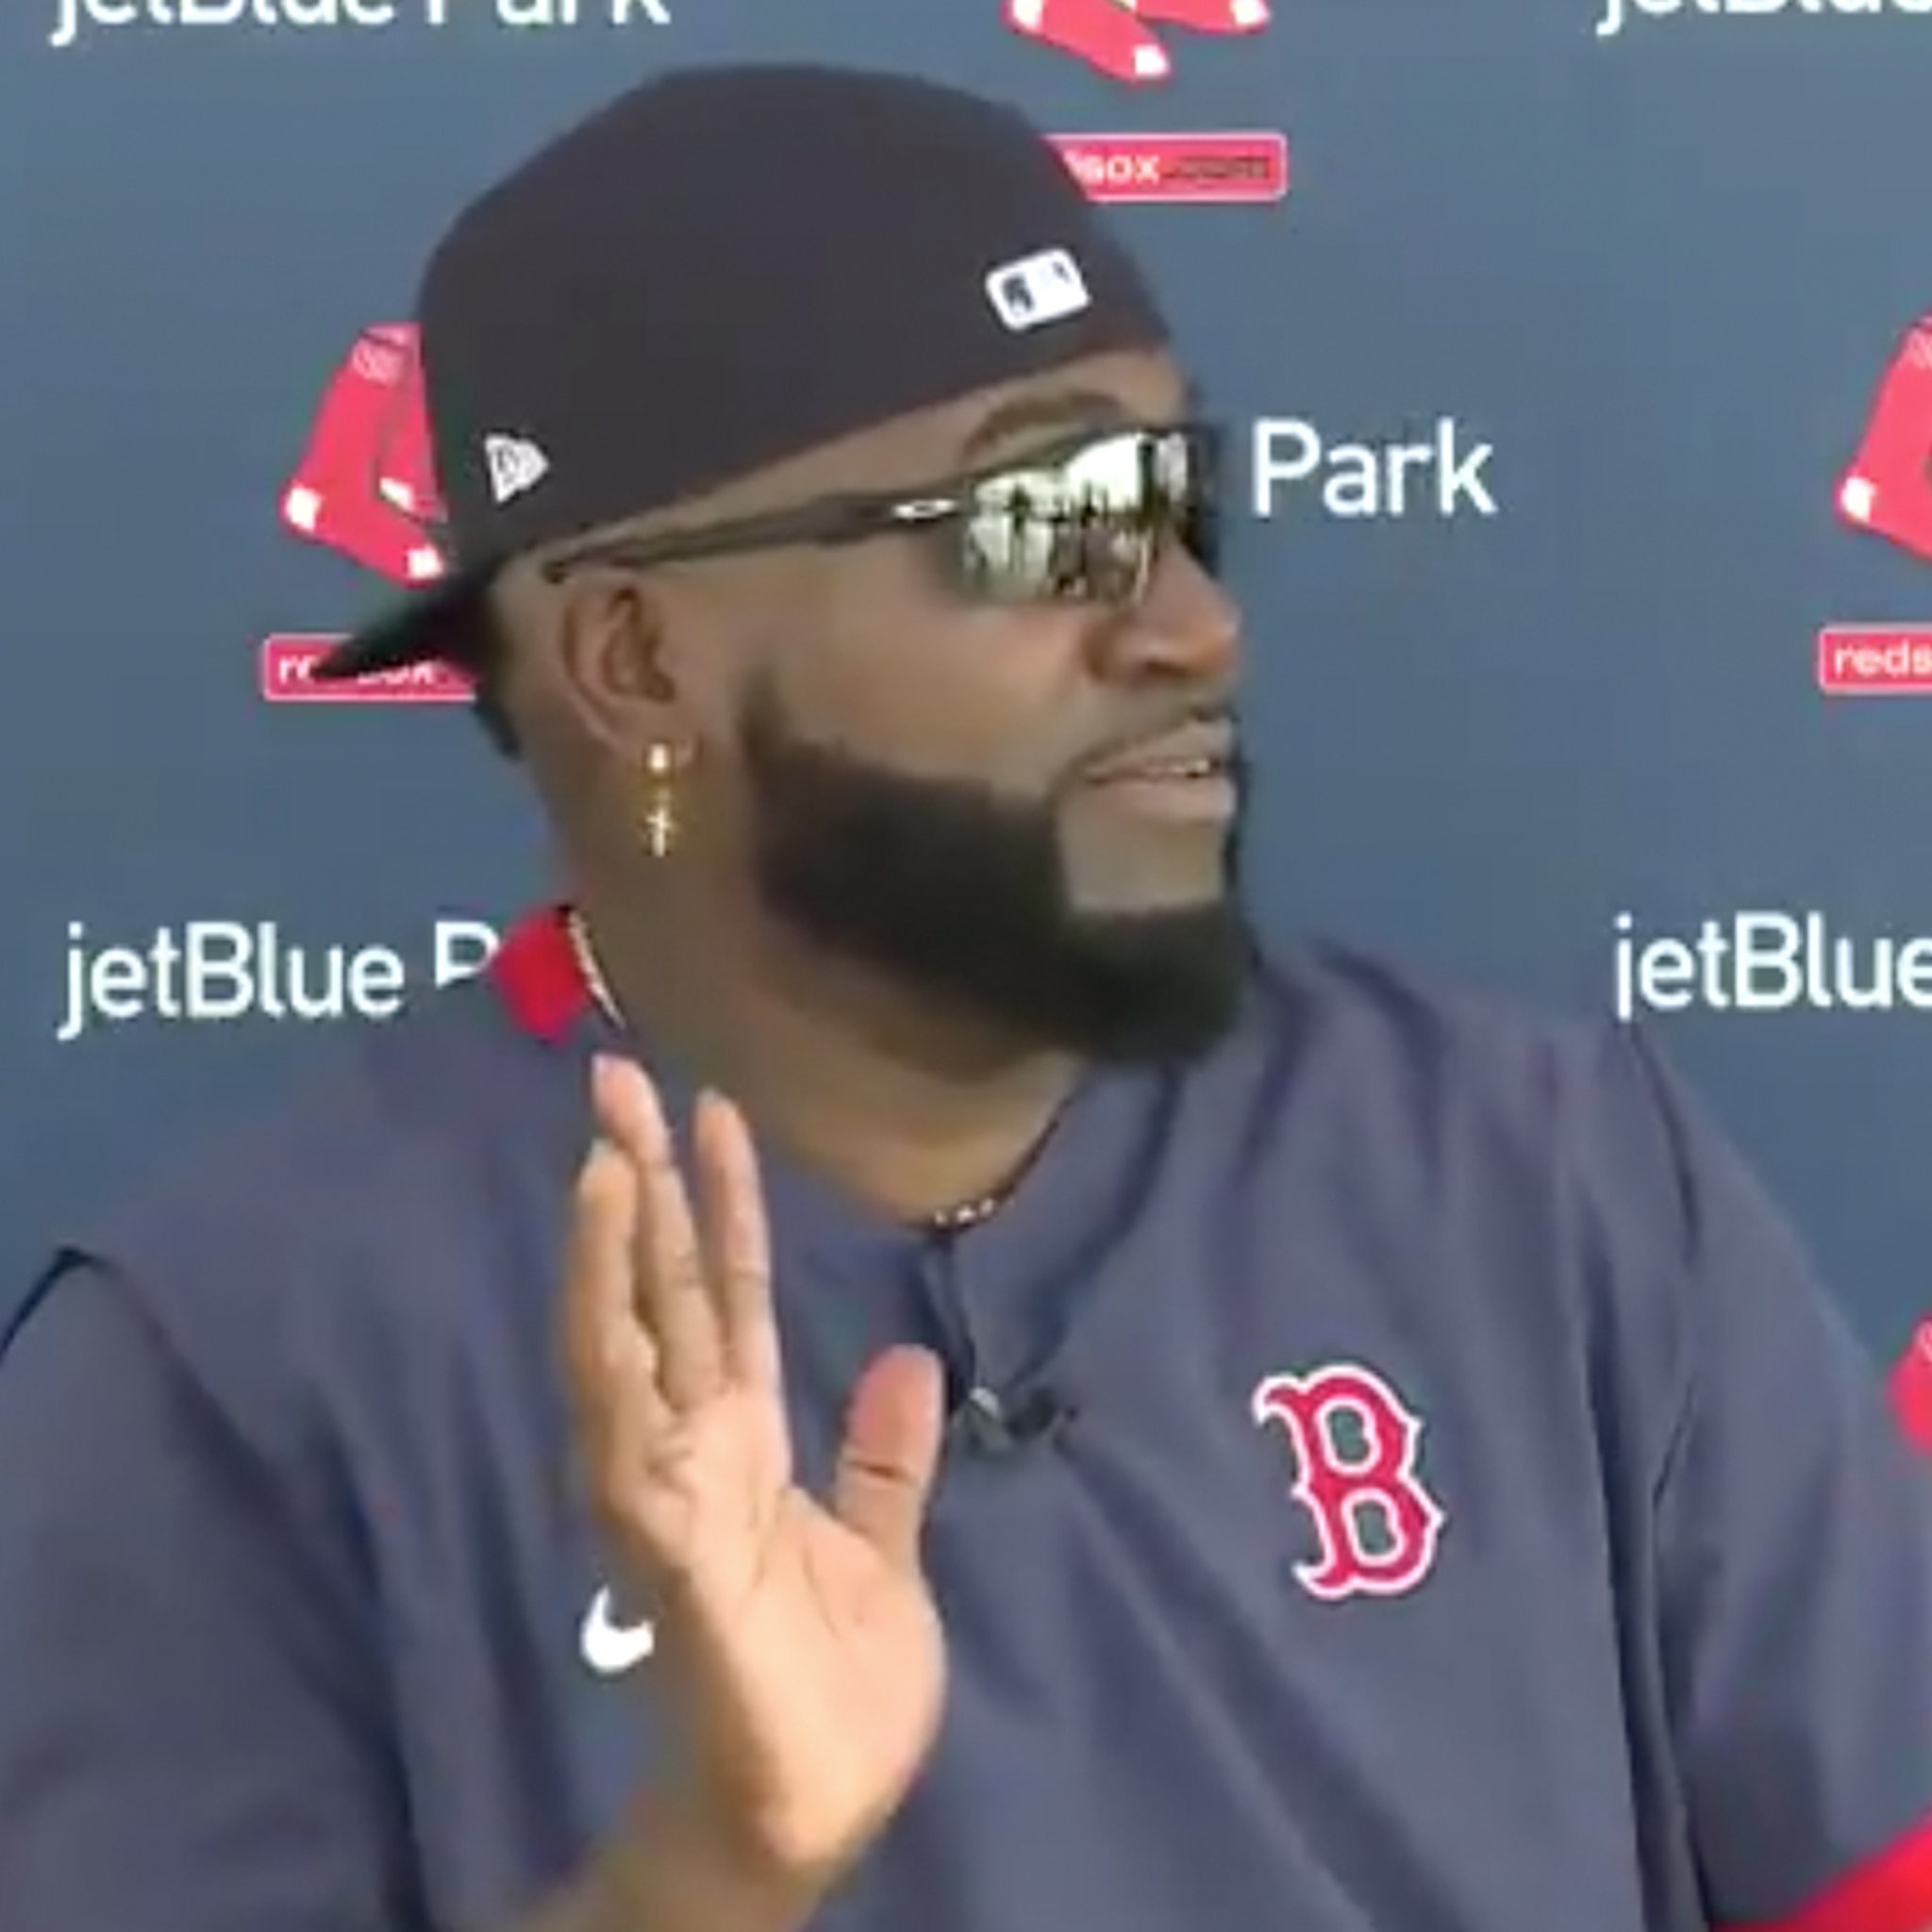 VIDEO: Astros mascot attempts to distract David Ortiz with belly